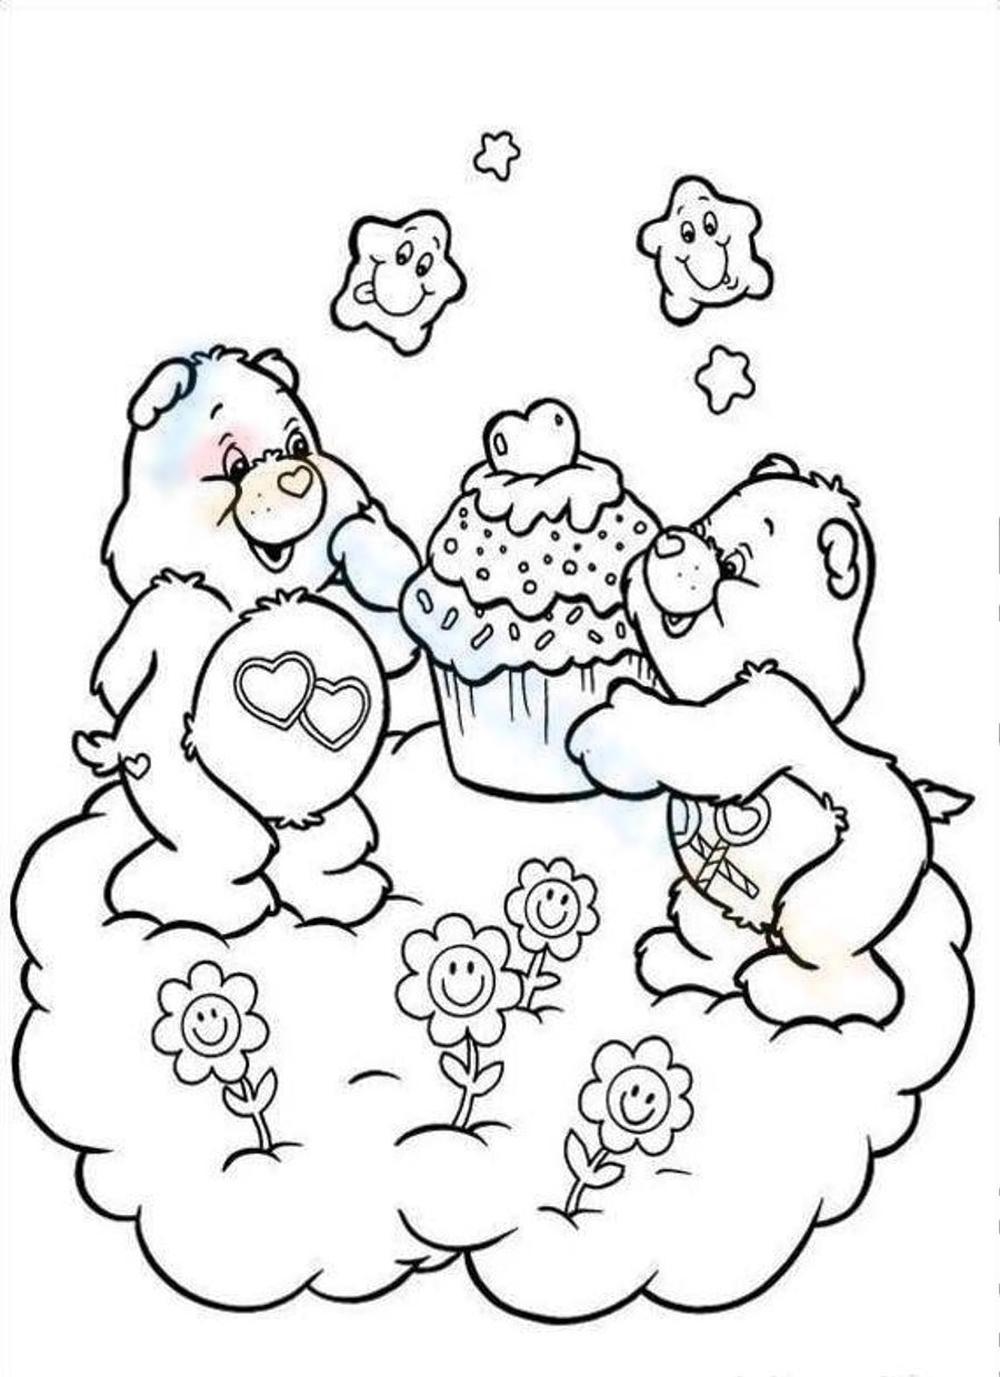 care bear coloring pages for valintimes day